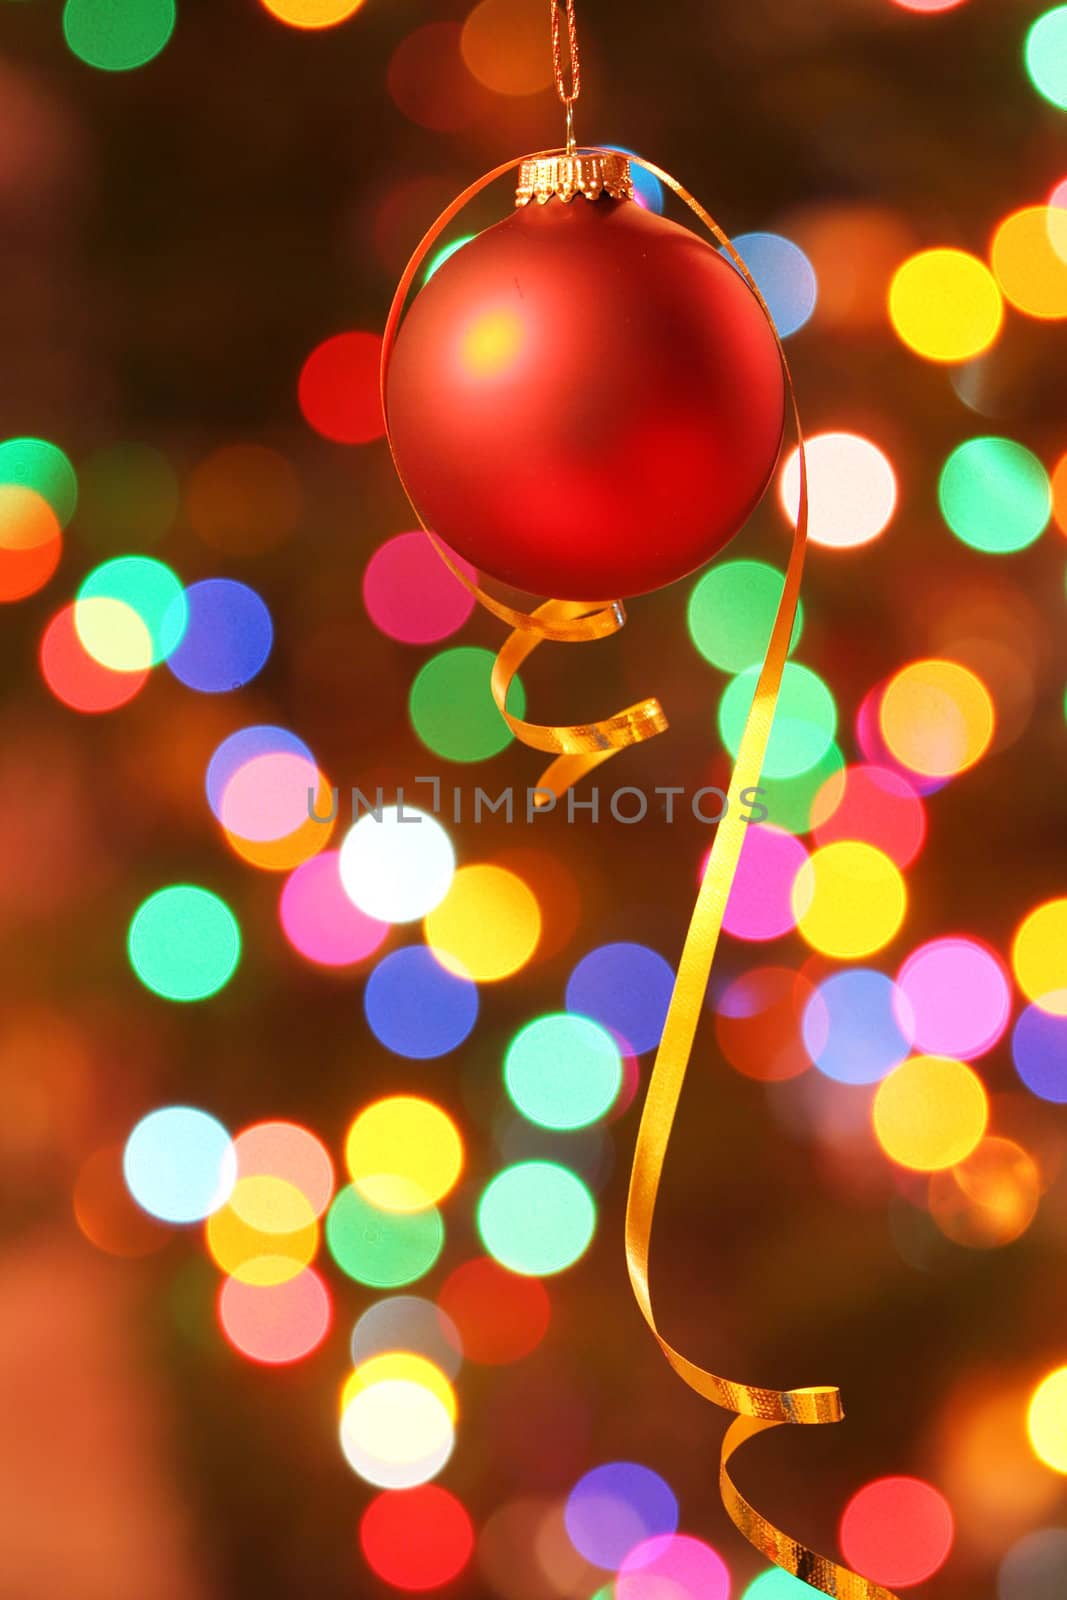 Red frosted Christmas ornament with colorful lights in background.